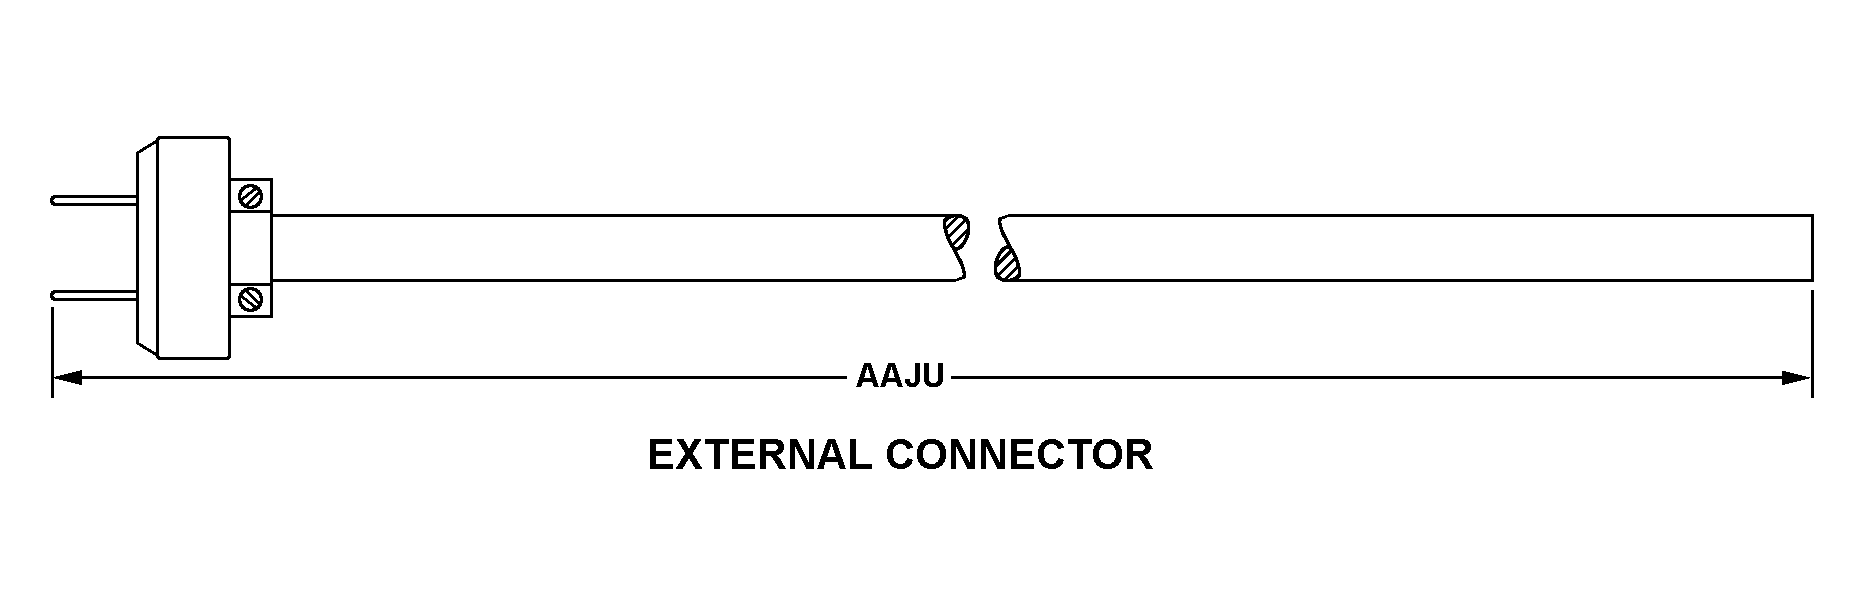 EXTERNAL CONNECTOR style nsn 6150-01-059-6771